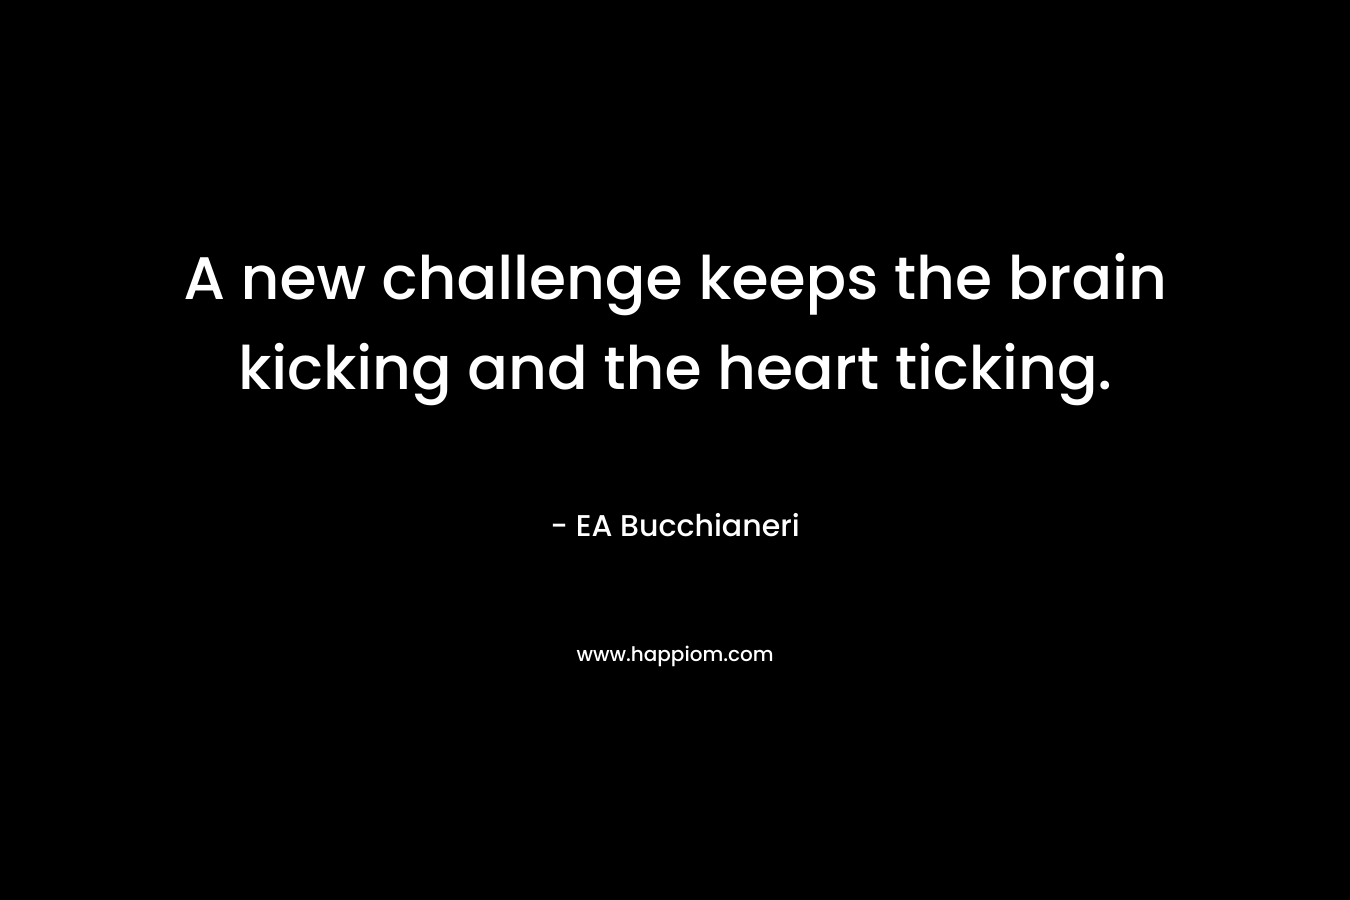 A new challenge keeps the brain kicking and the heart ticking. – EA Bucchianeri